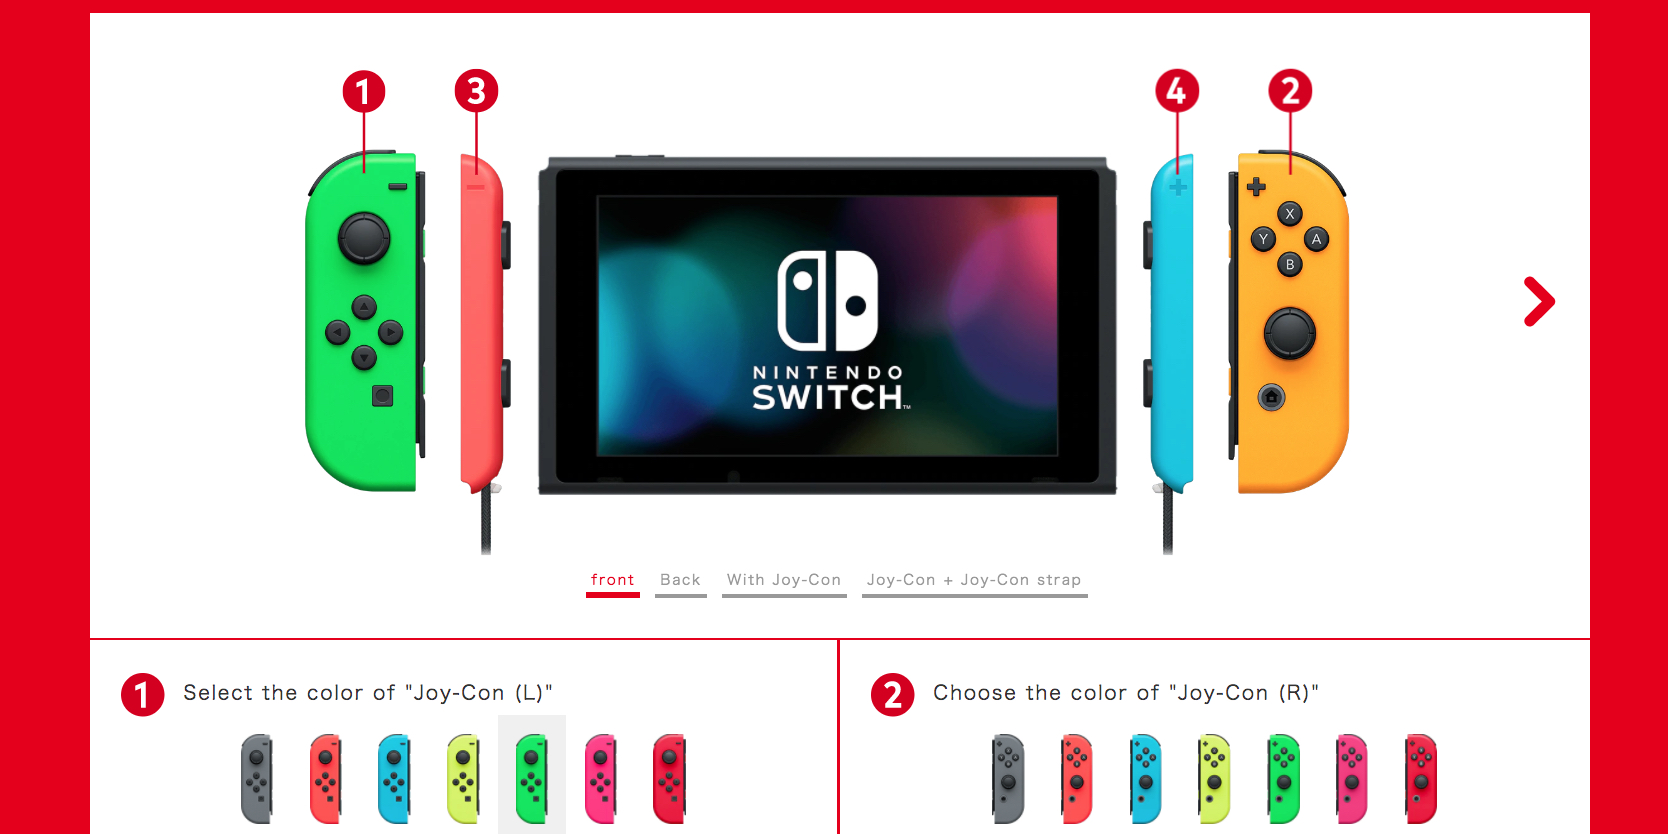 You can build-your-own Switch with custom Joy-Con in Japan - 9to5Toys